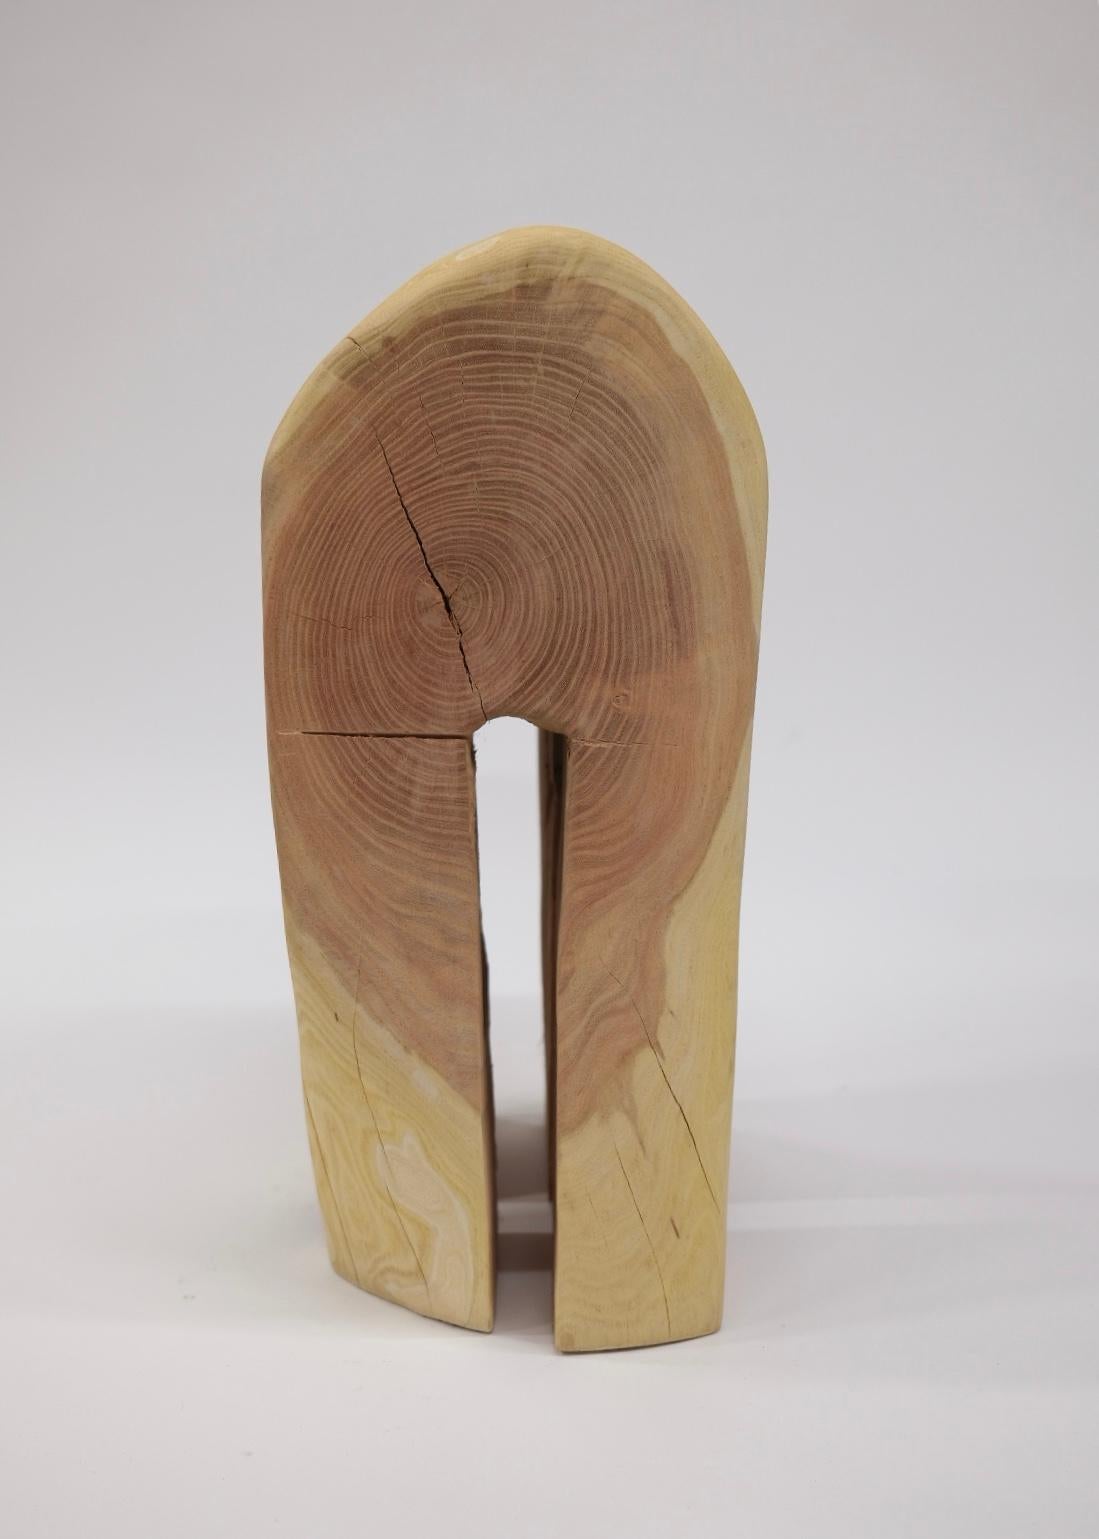 Sculpted from a dilapidated red oak stump found on the side of the road, “Nature & Nurture” serves as a balance/duality that isn’t meant to combat, but demonstrate how nature and man’s touch can coexist. While the first impression is that of